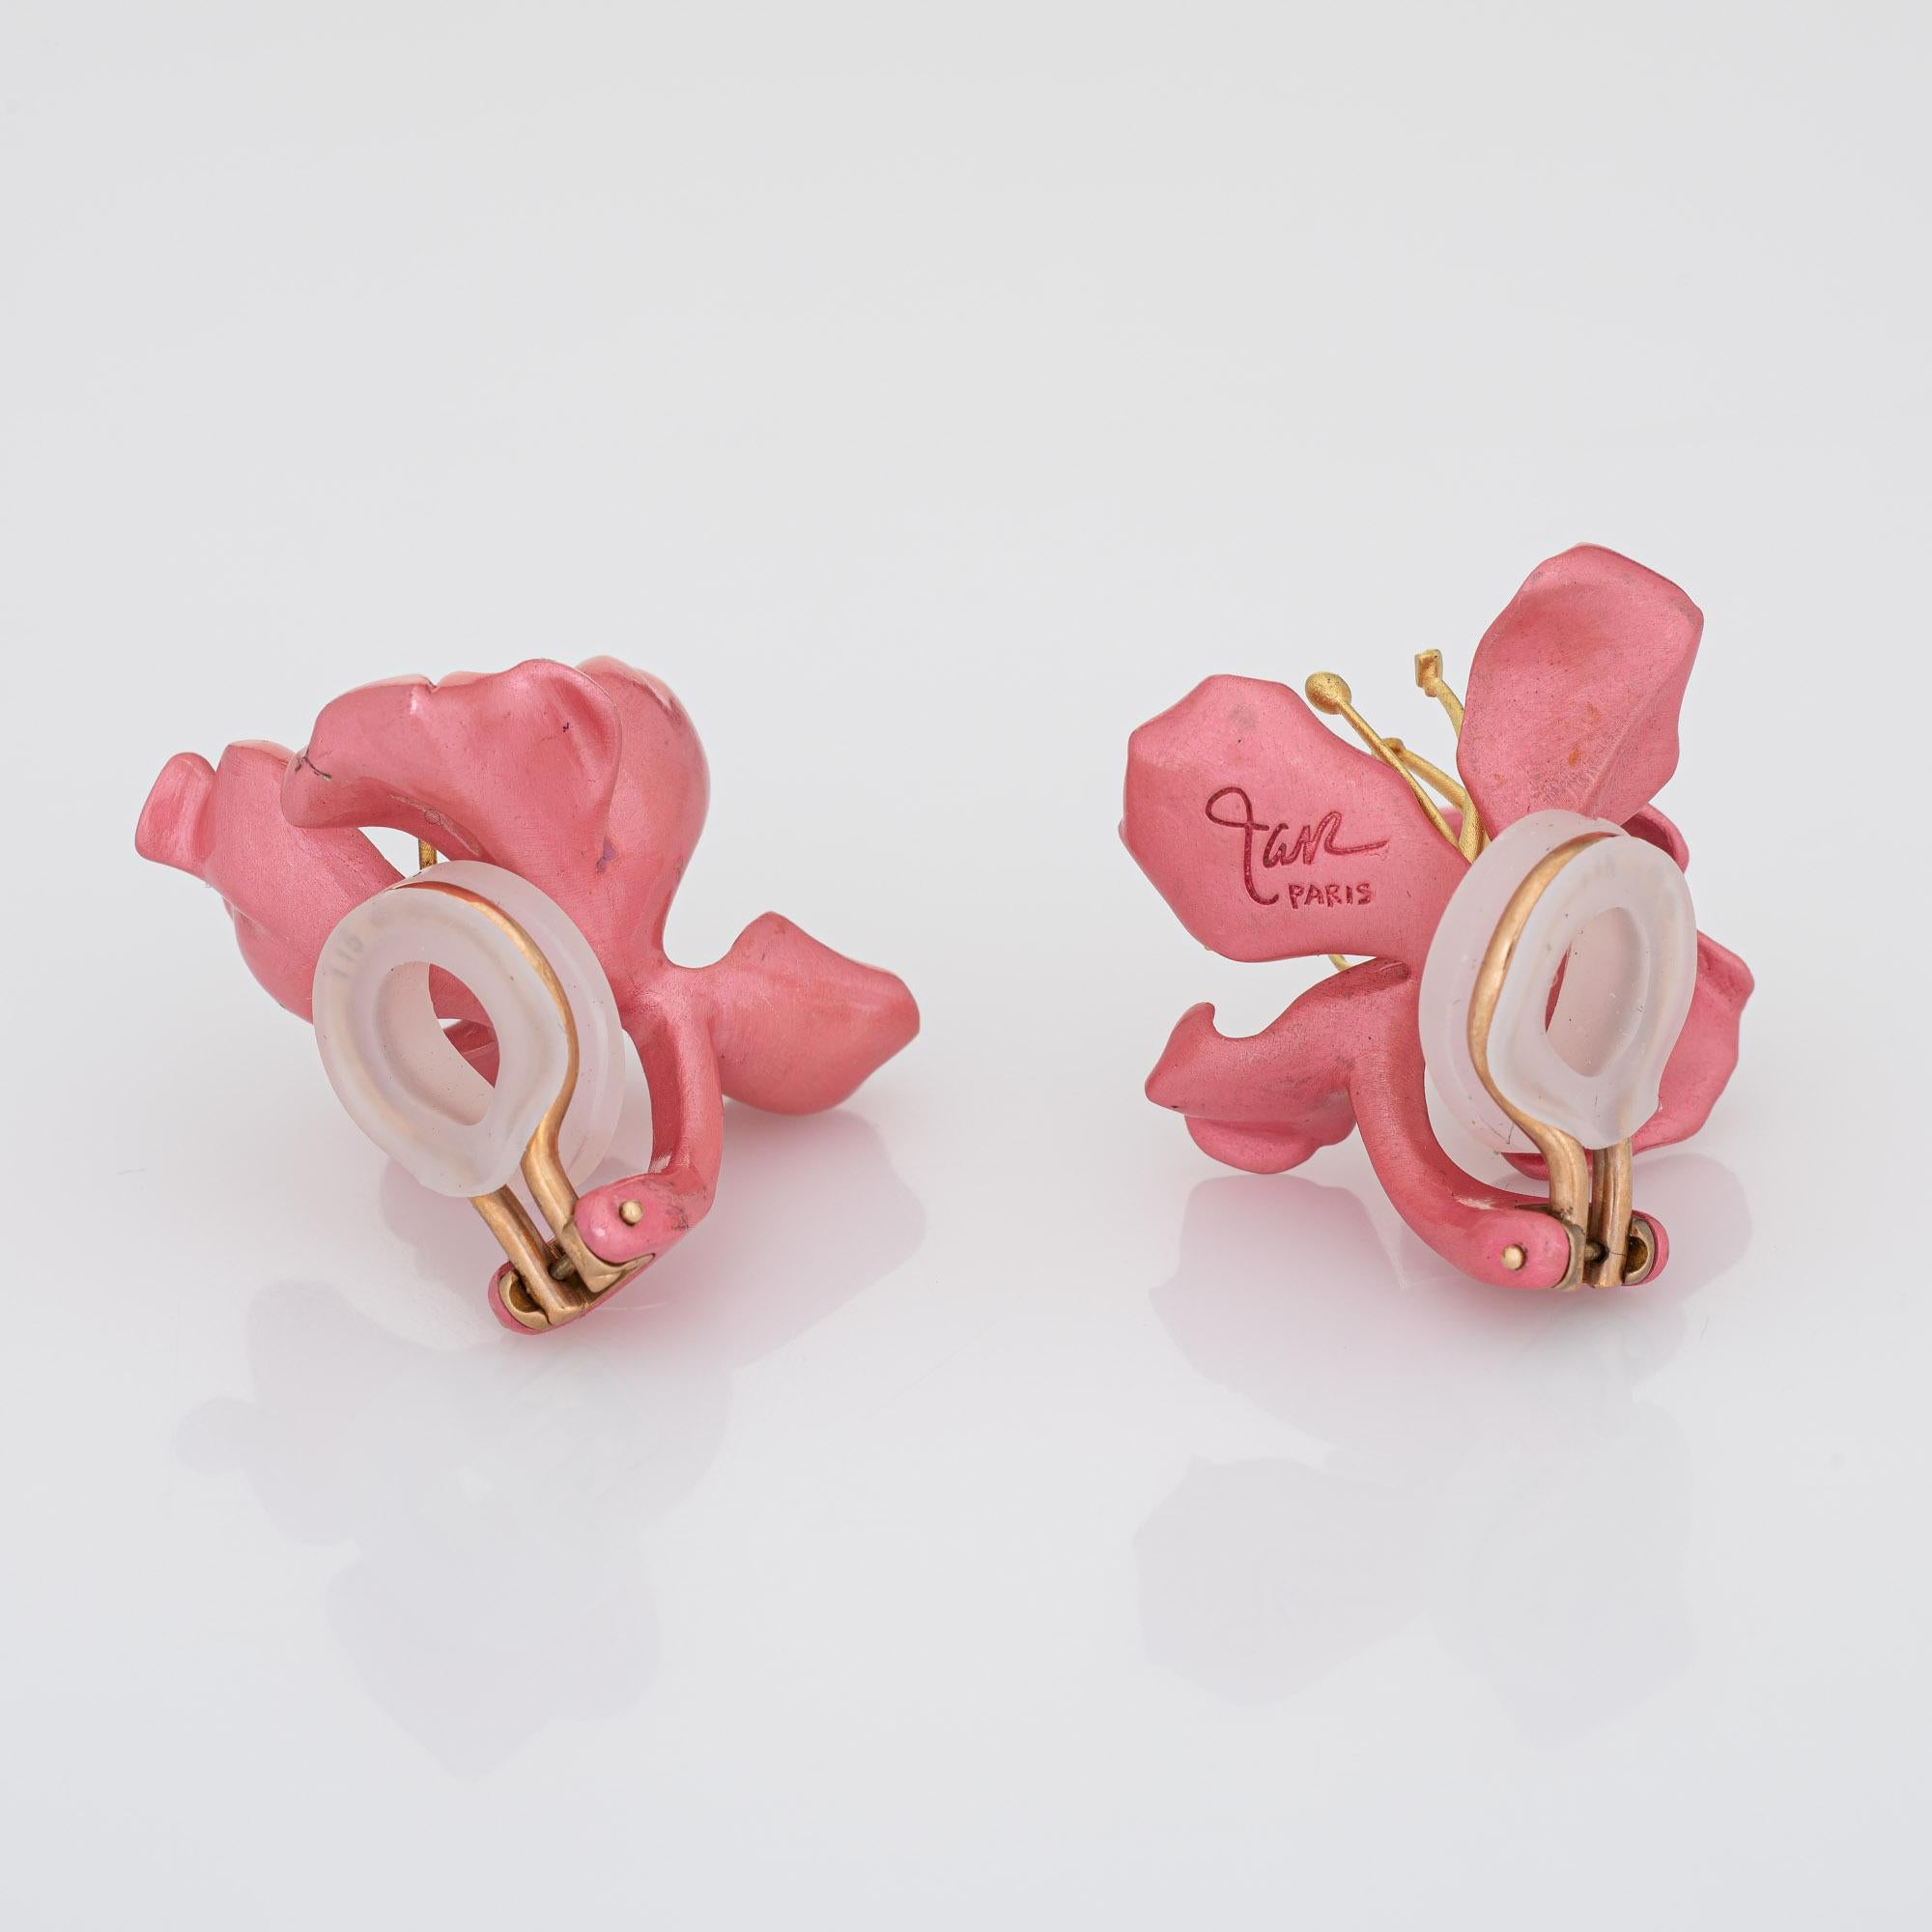 Beautifully detailed almond blossom earrings created by JAR (Joel Arthur Rosenthal) crafted in 18k yellow gold and silver. 

The almond blossoms are composed of sculpted silver petals with applied pink enamel and 18k yellow gold pistils to the